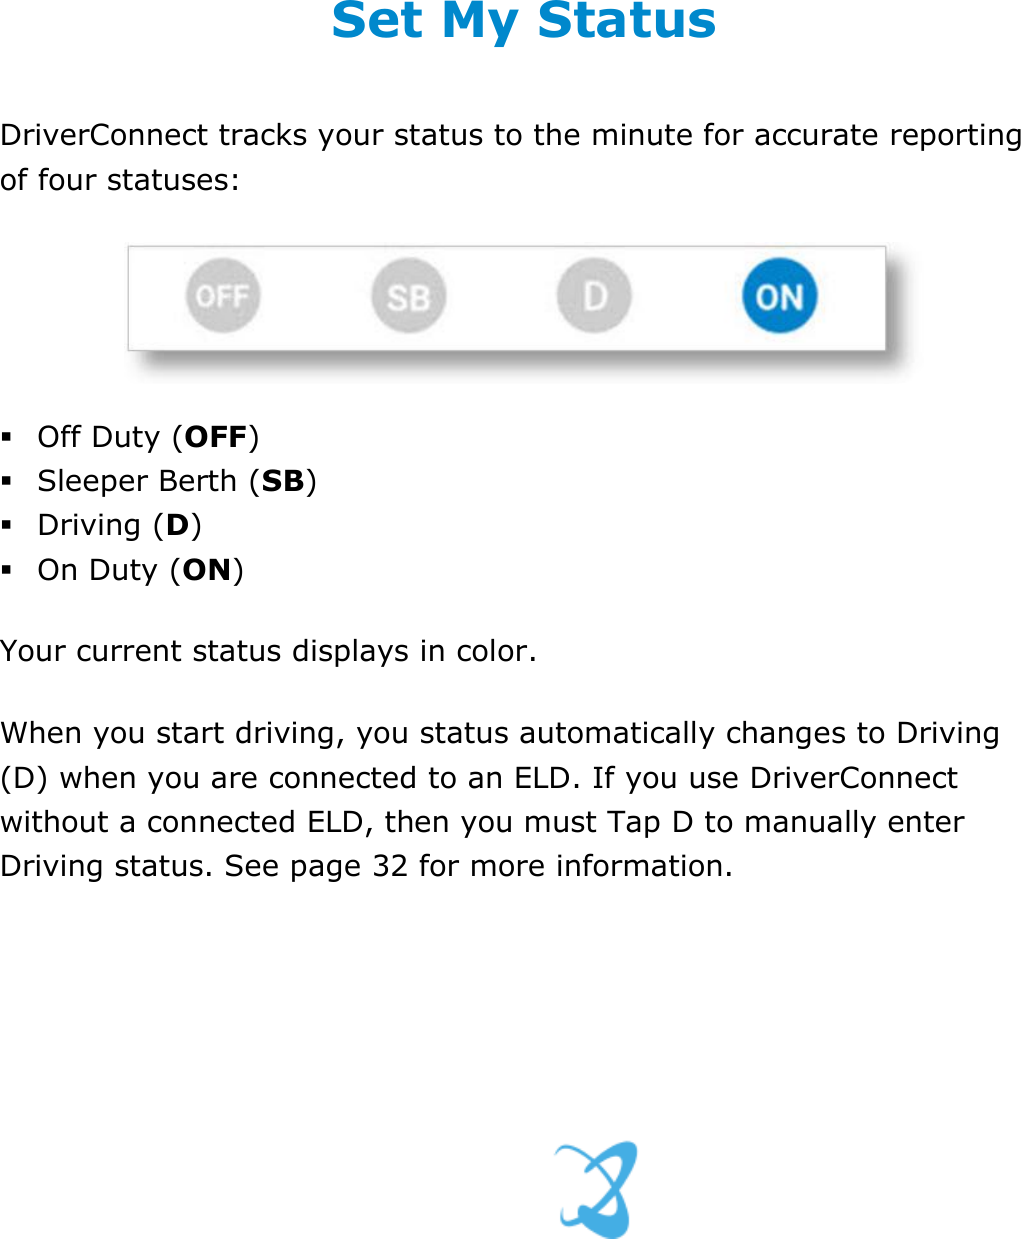 Set My Duty Status DriverConnect User Guide  28 © 2016-2017, Rand McNally, Inc. Set My Status DriverConnect tracks your status to the minute for accurate reporting of four statuses:    Off Duty (OFF)  Sleeper Berth (SB)   Driving (D)  On Duty (ON) Your current status displays in color. When you start driving, you status automatically changes to Driving (D) when you are connected to an ELD. If you use DriverConnect without a connected ELD, then you must Tap D to manually enter Driving status. See page 32 for more information.   